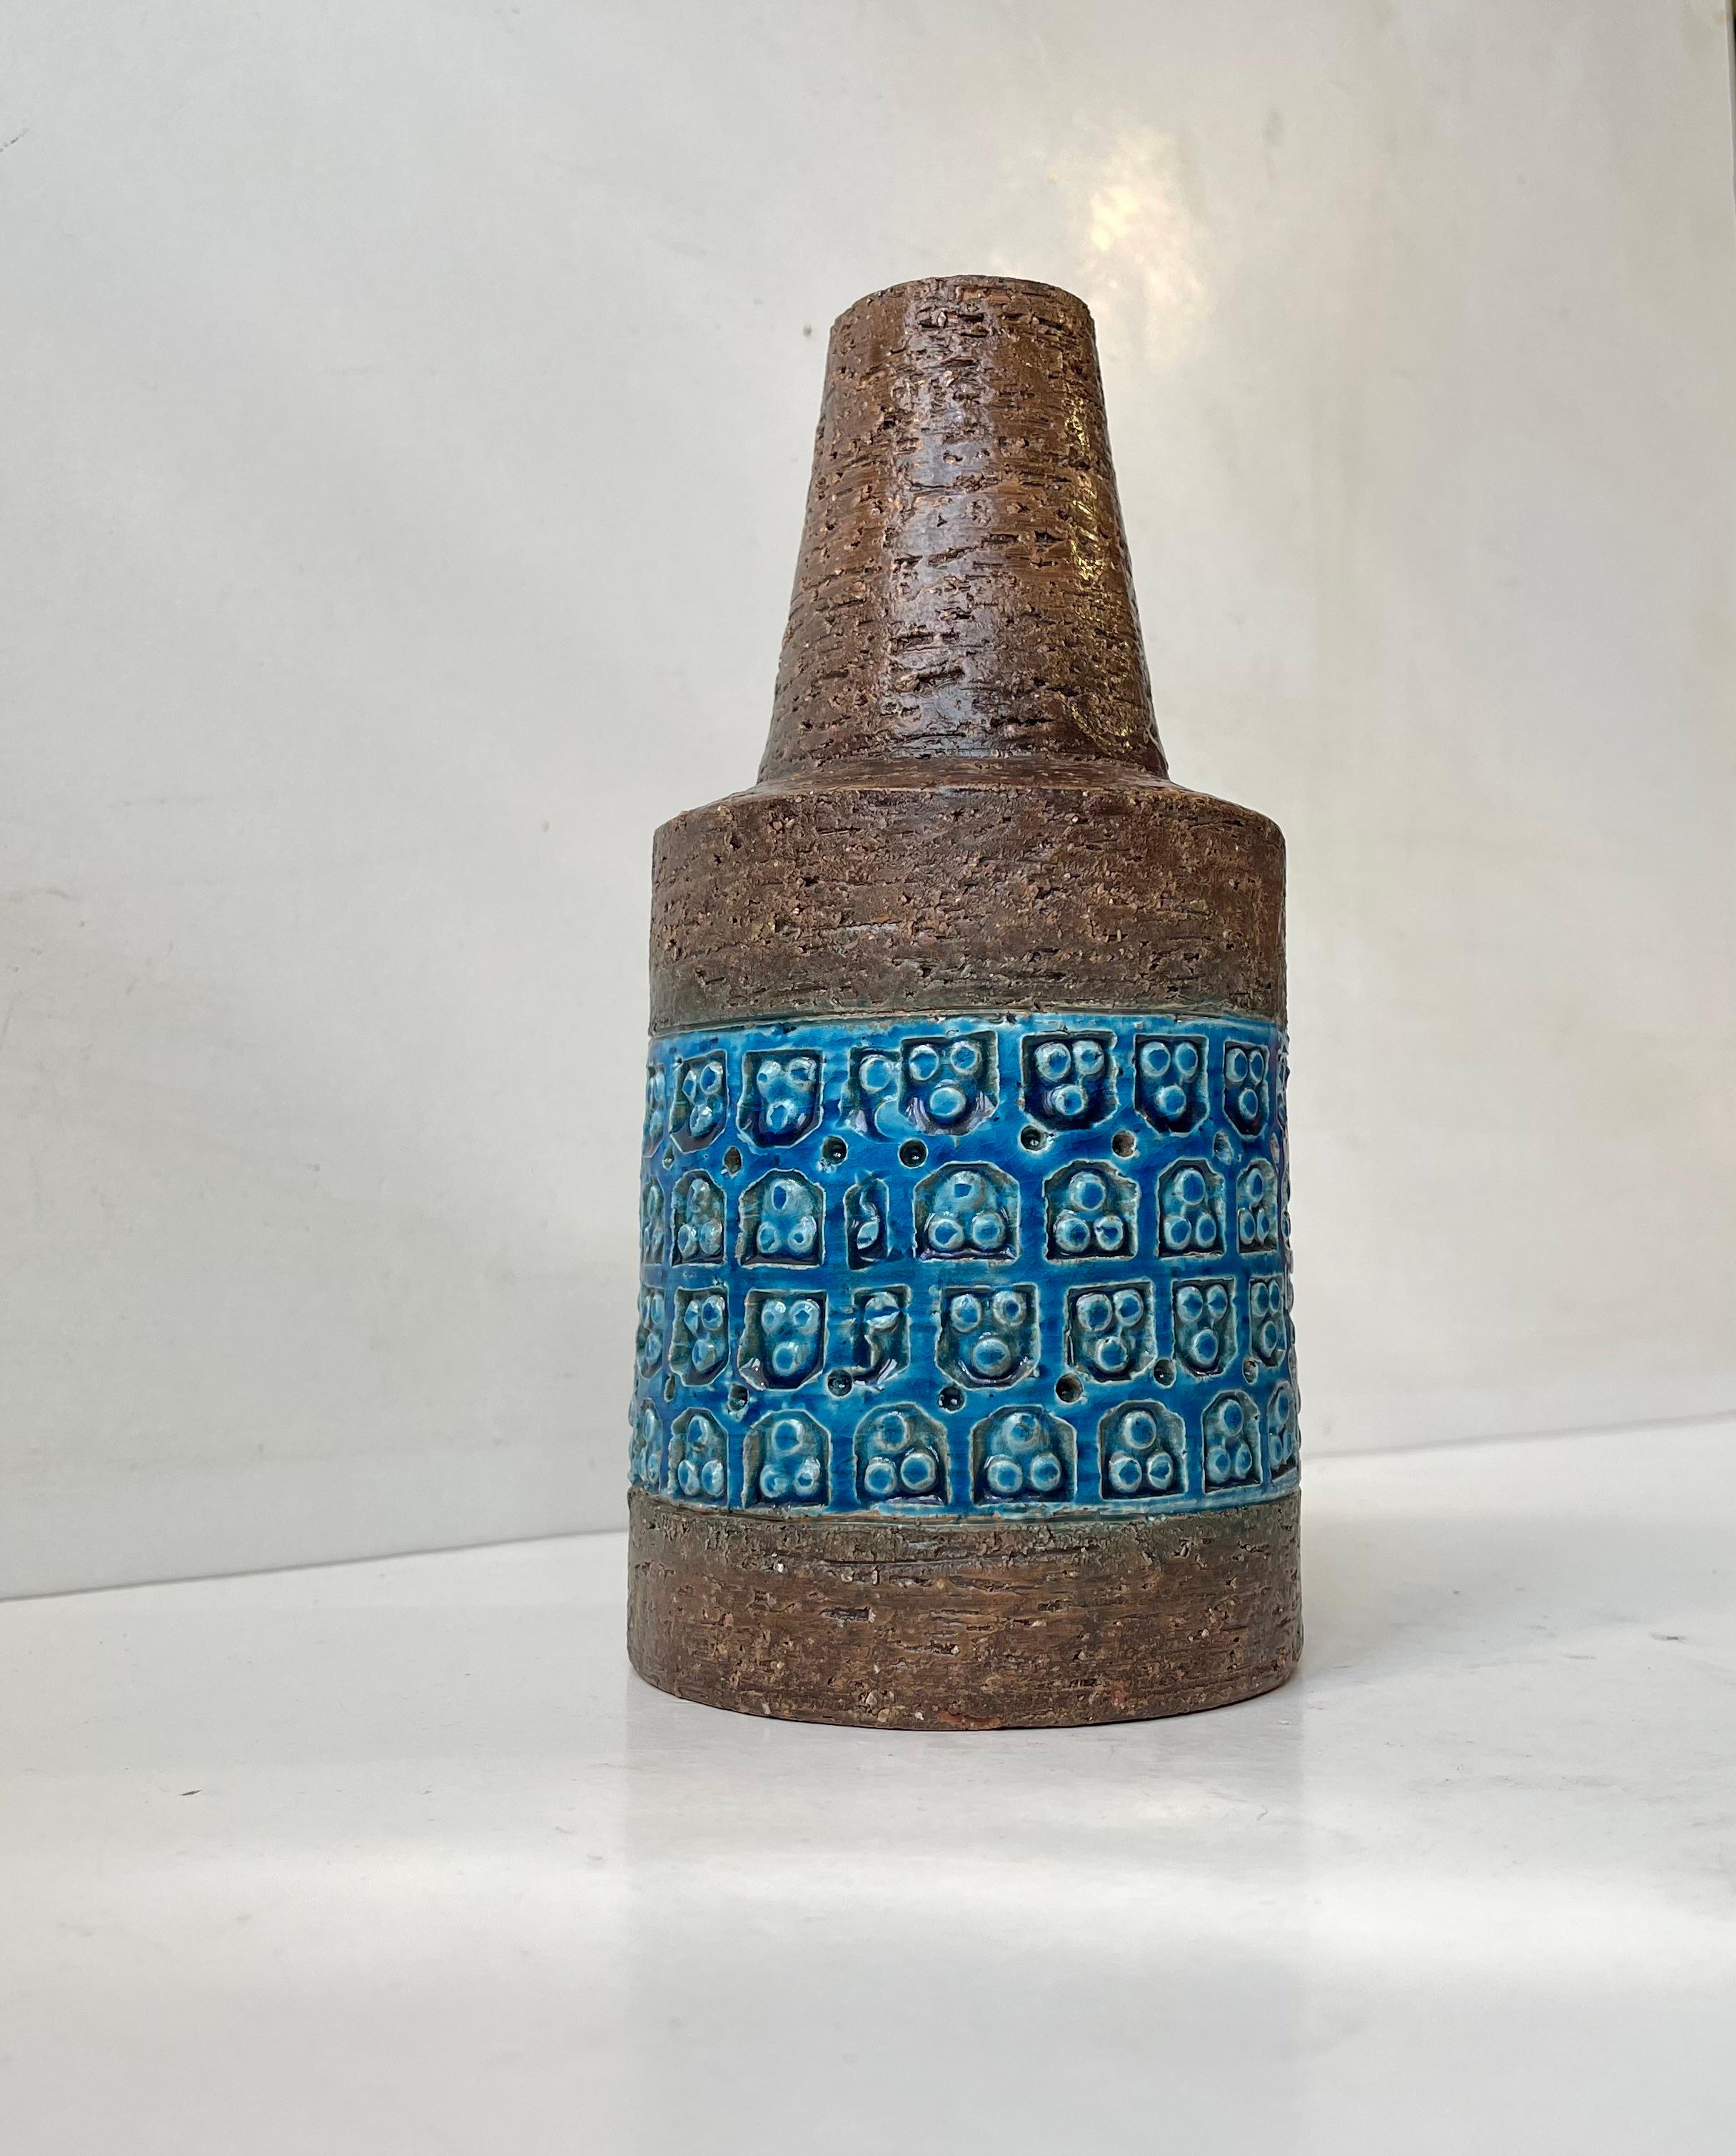 The Italian ceramist Aldo Londi designed this lacquered chamotte stoneware vase glazed with Rimini Blue Trifoglio patterns. Manufactured in Italy by Bitossi during the 1960s. Measurements: H: 20 cm, D: 10/4 (base/top).